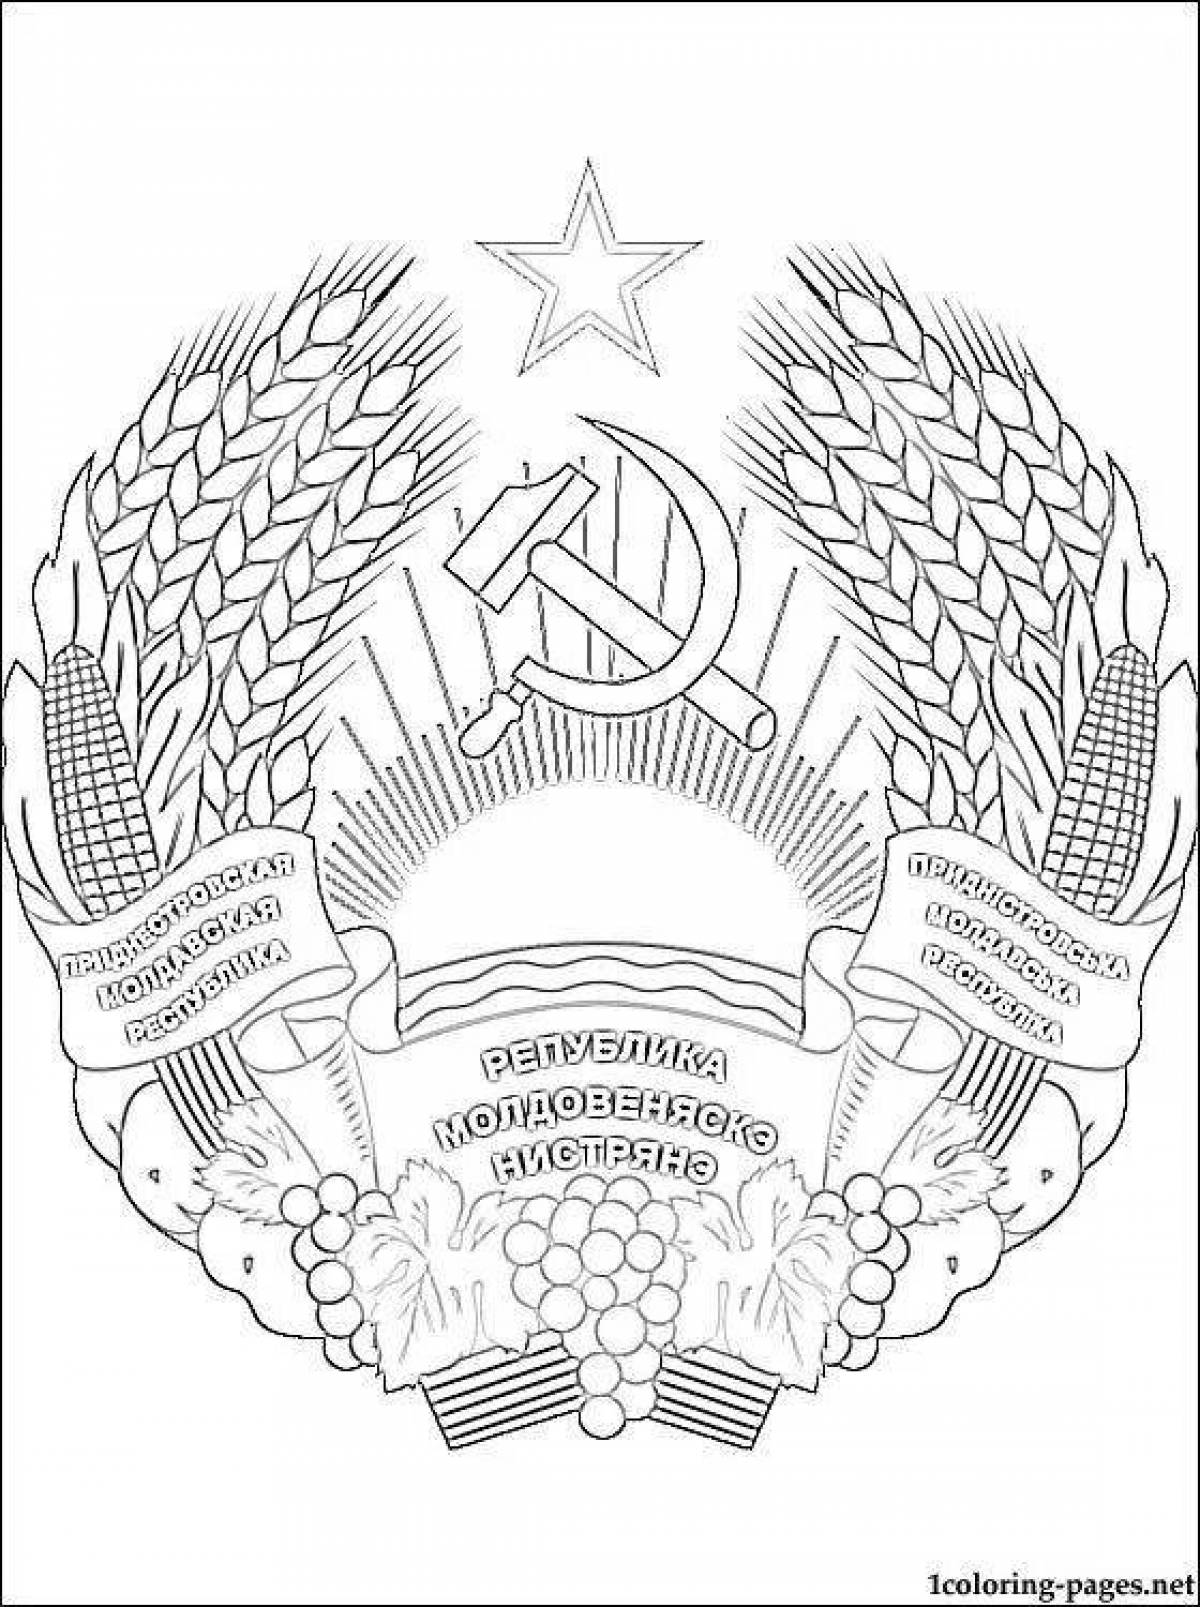 Impressive coloring coat of arms of the ussr